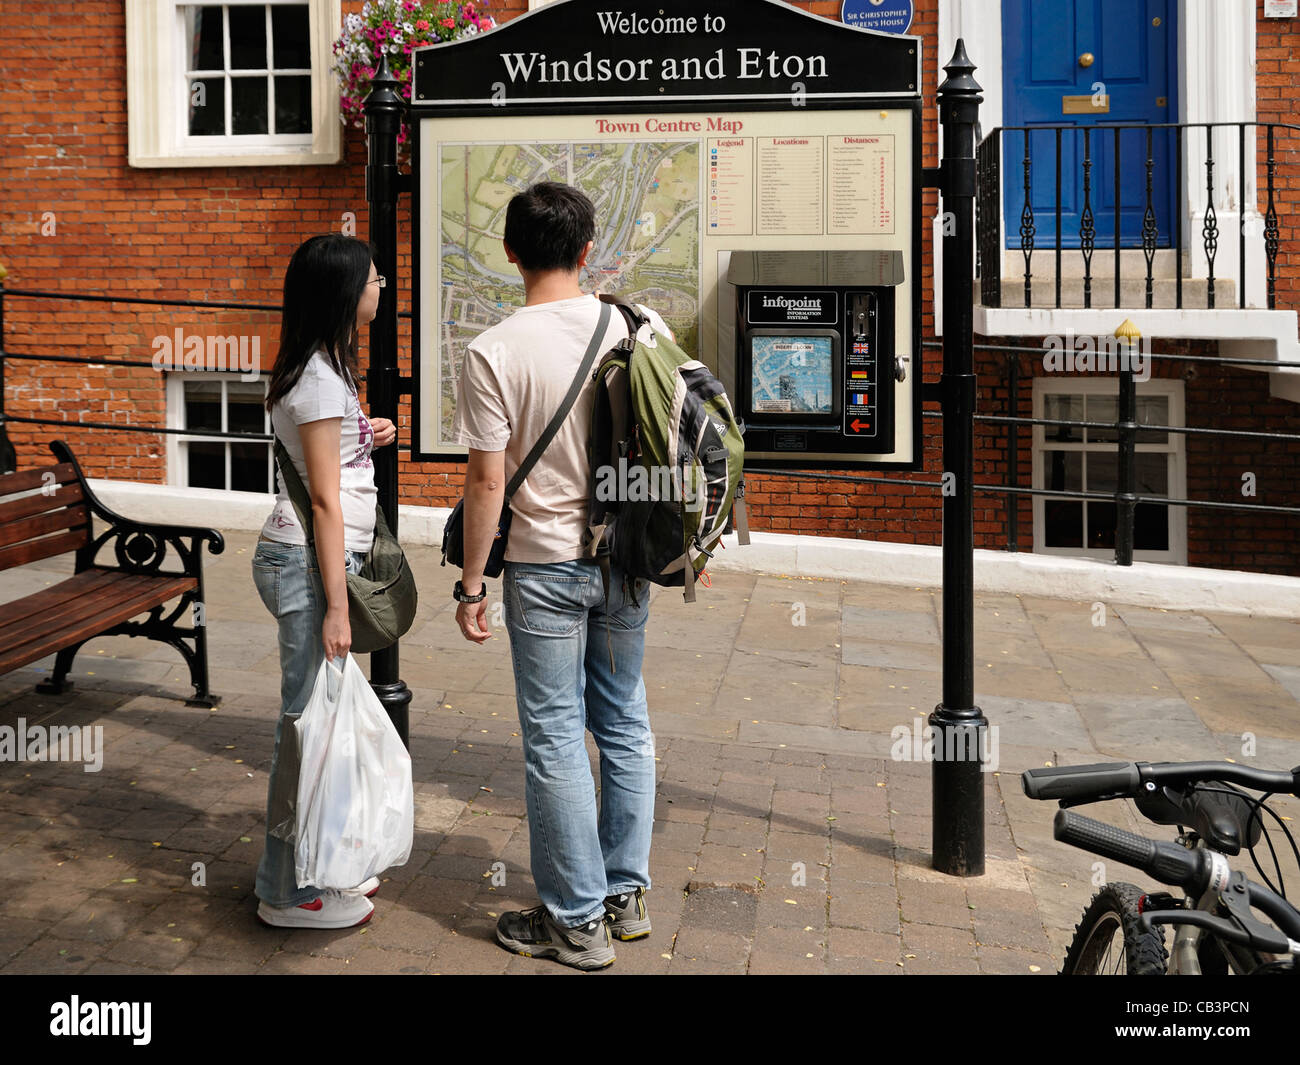 Couple Looking at a Street Tourist Information Point with a Map of Locations, Windsor and Eton, Berkshire, UK. Stock Photo